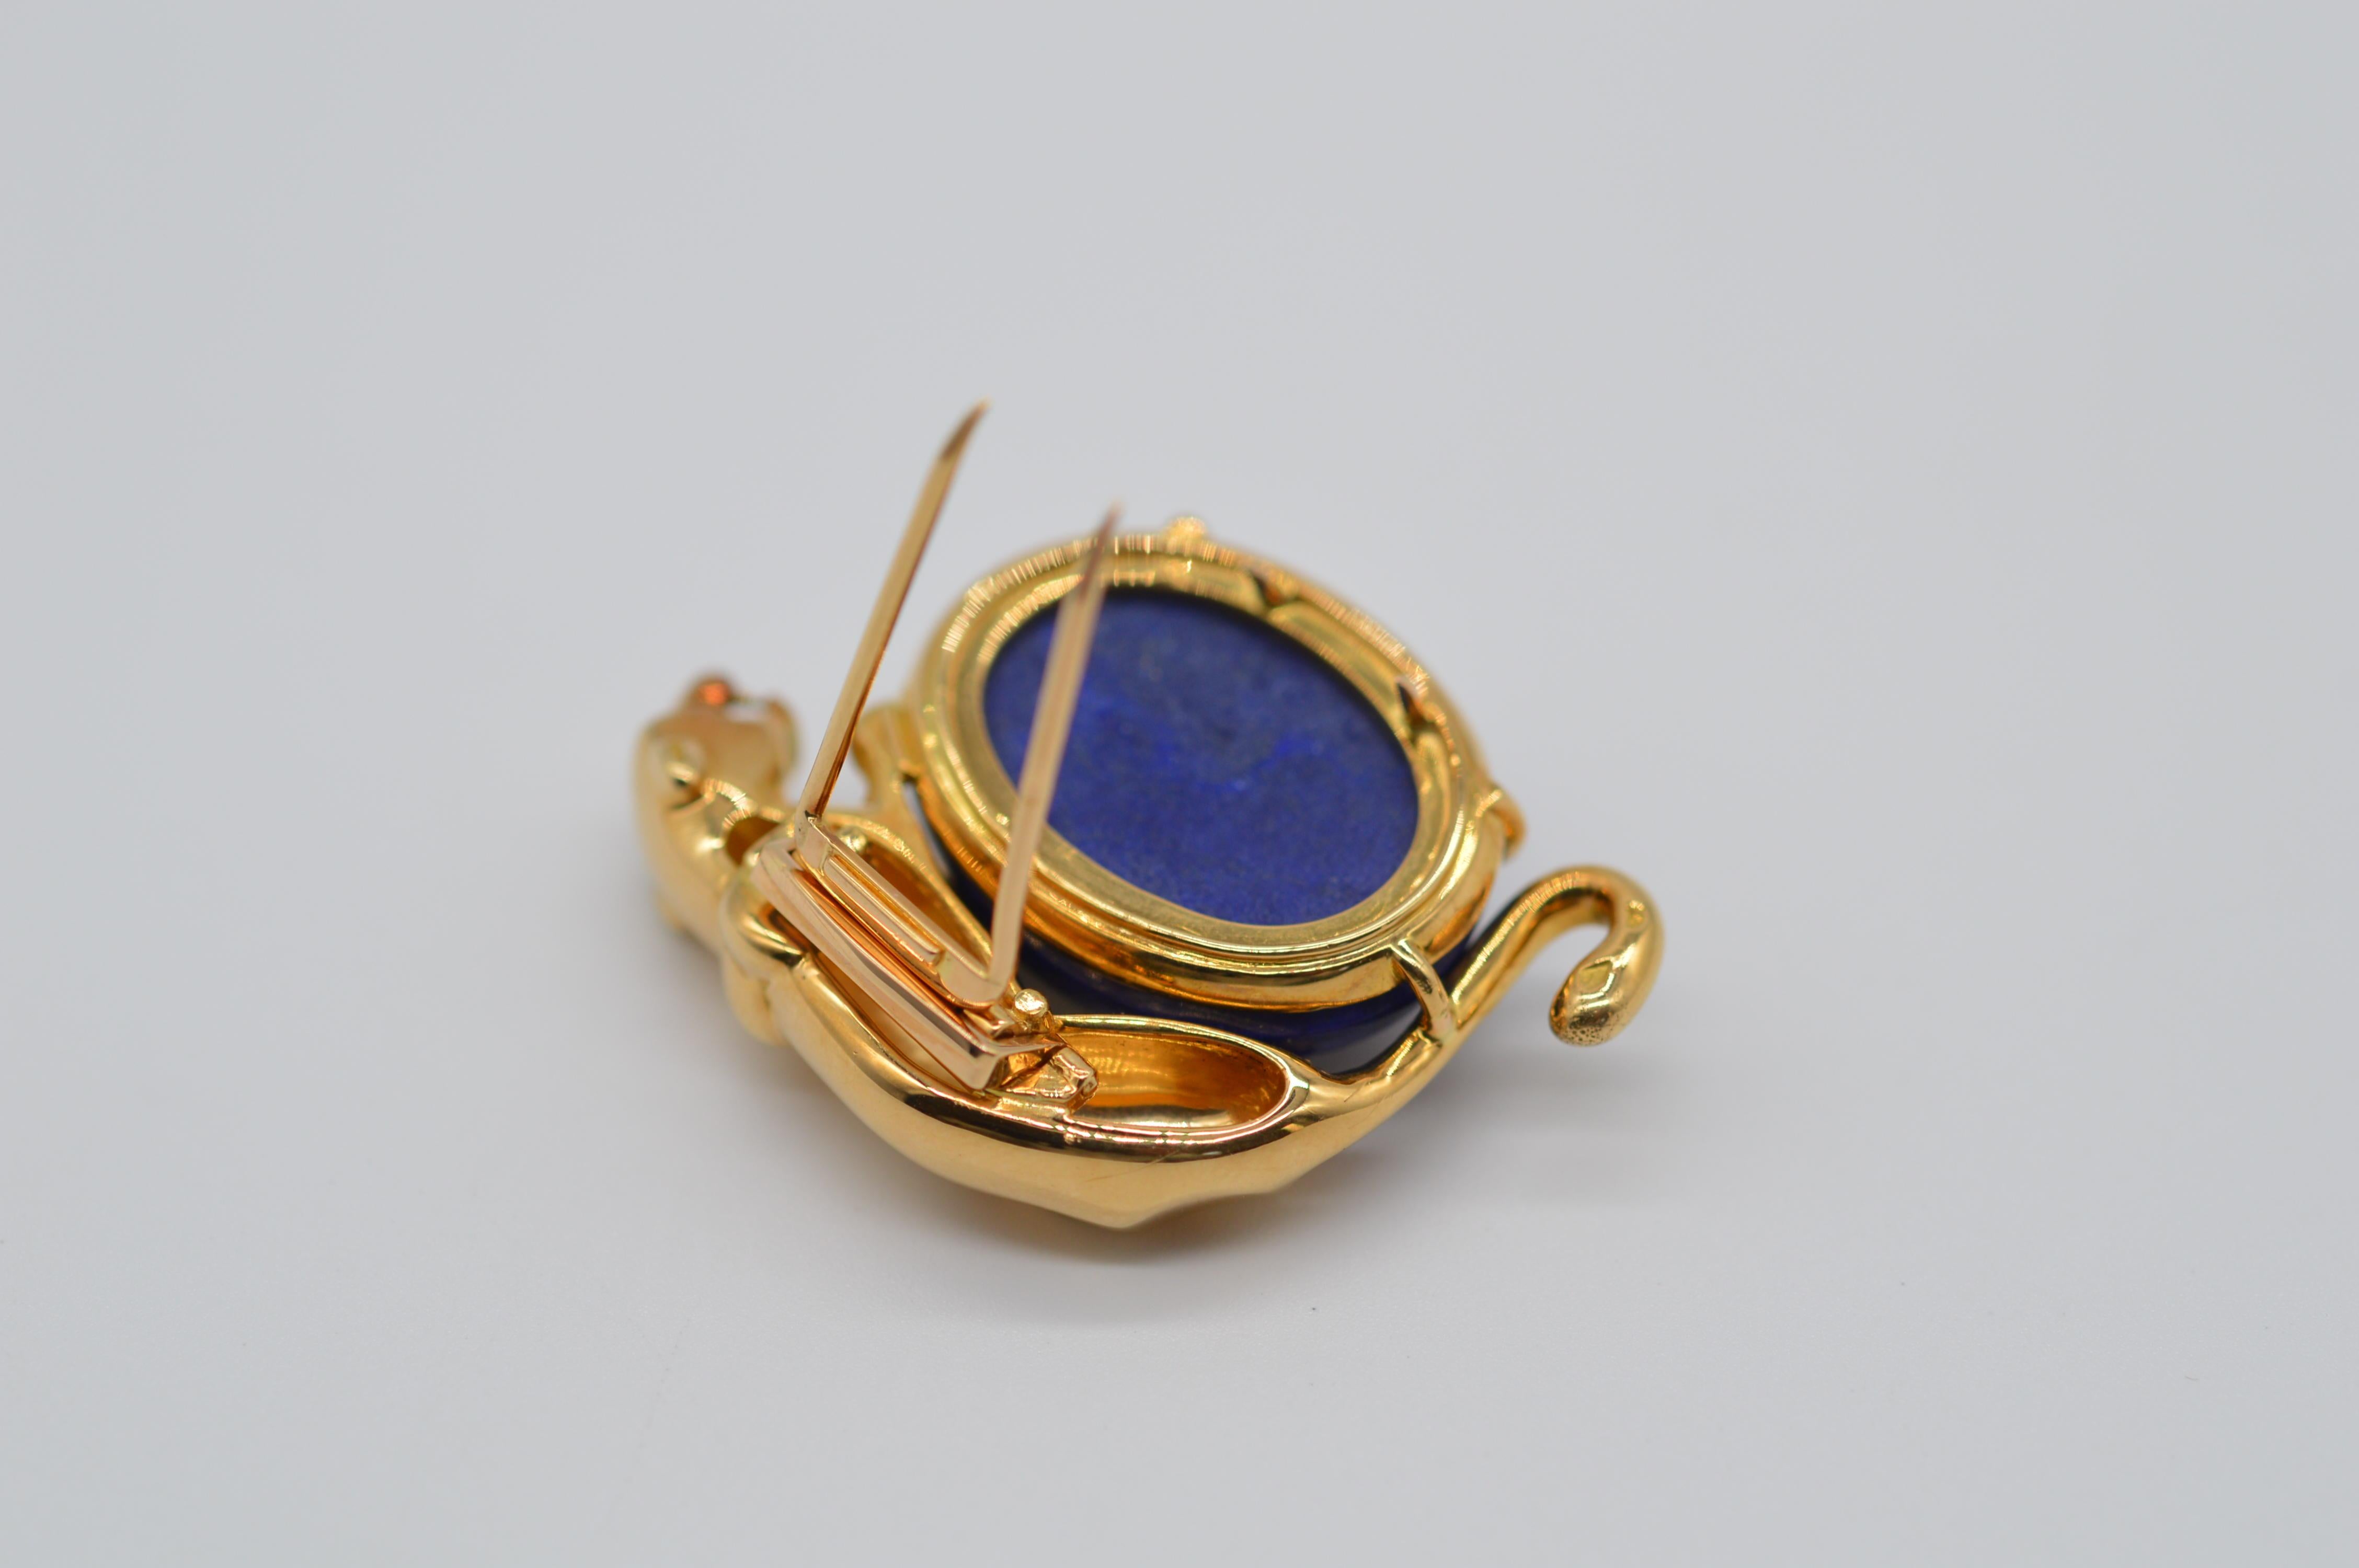 Cartier Panthère Lapis Lazuli 18K Yellow Gold Brooch with Emerald Eyes Unworn For Sale 1